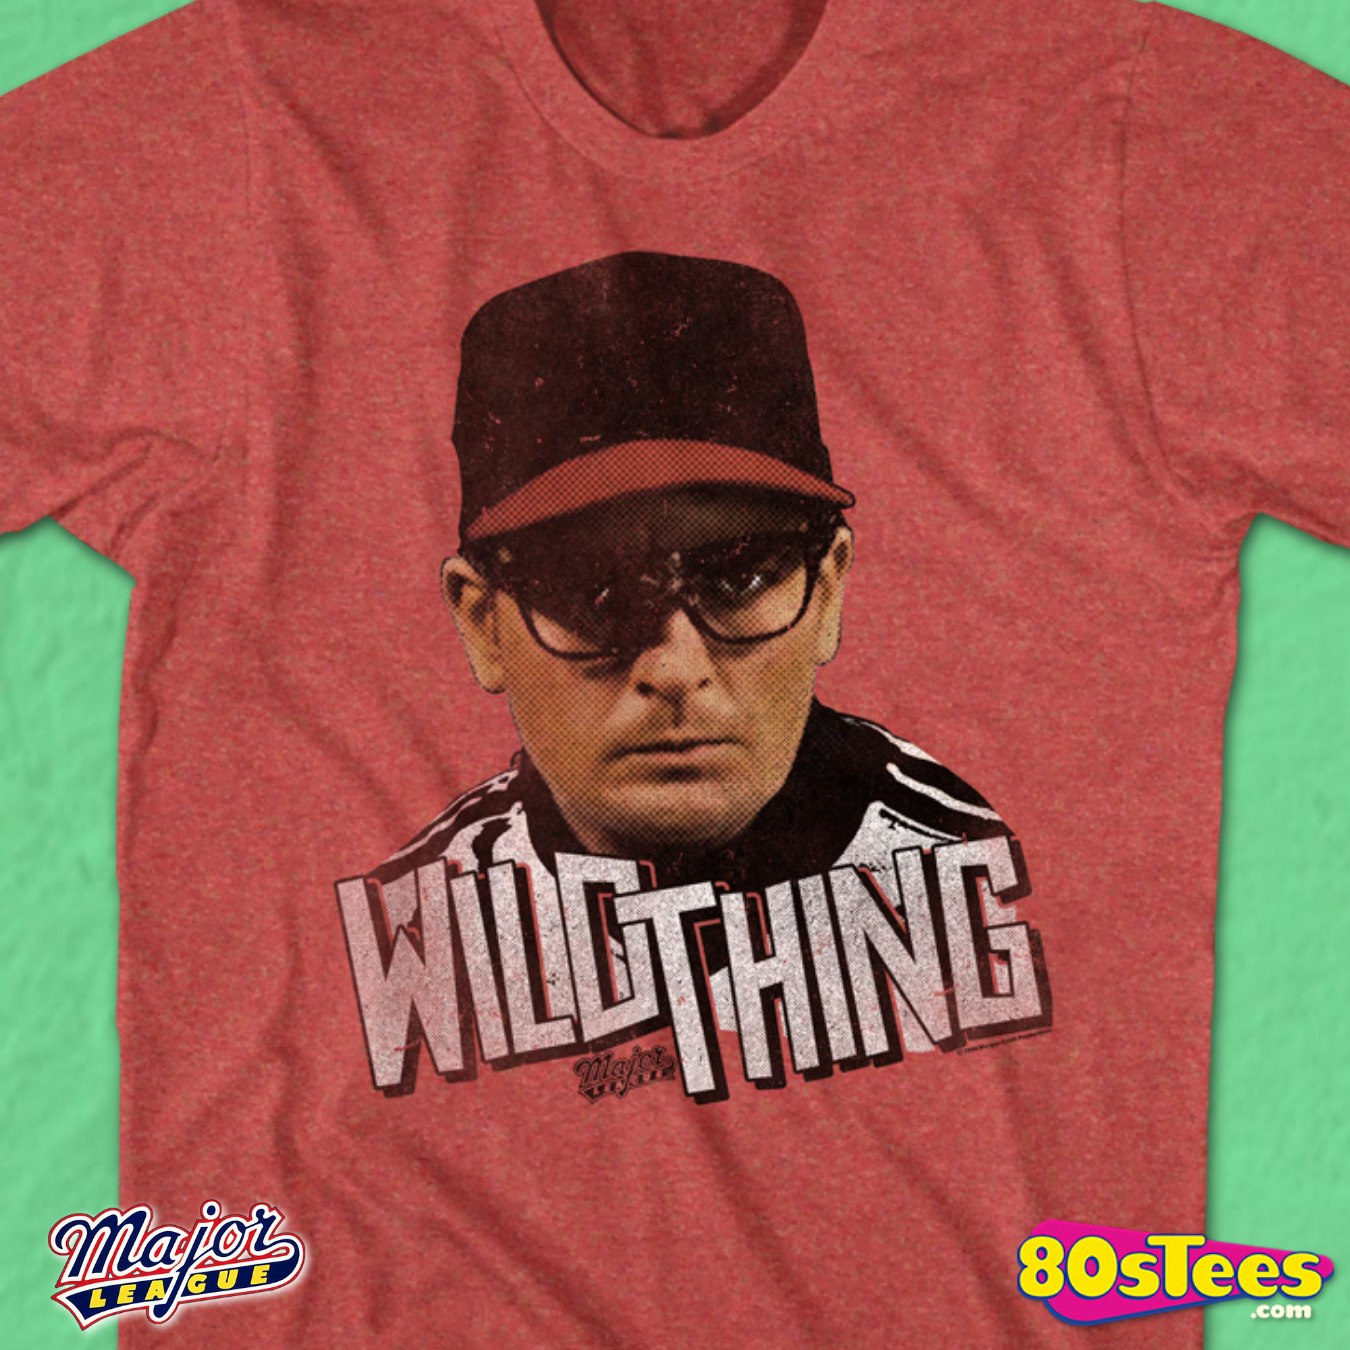 Ricky Vaughn Cleveland Indians /"Wild Thing/" jersey T-shirt Shirt or Long Sleeve